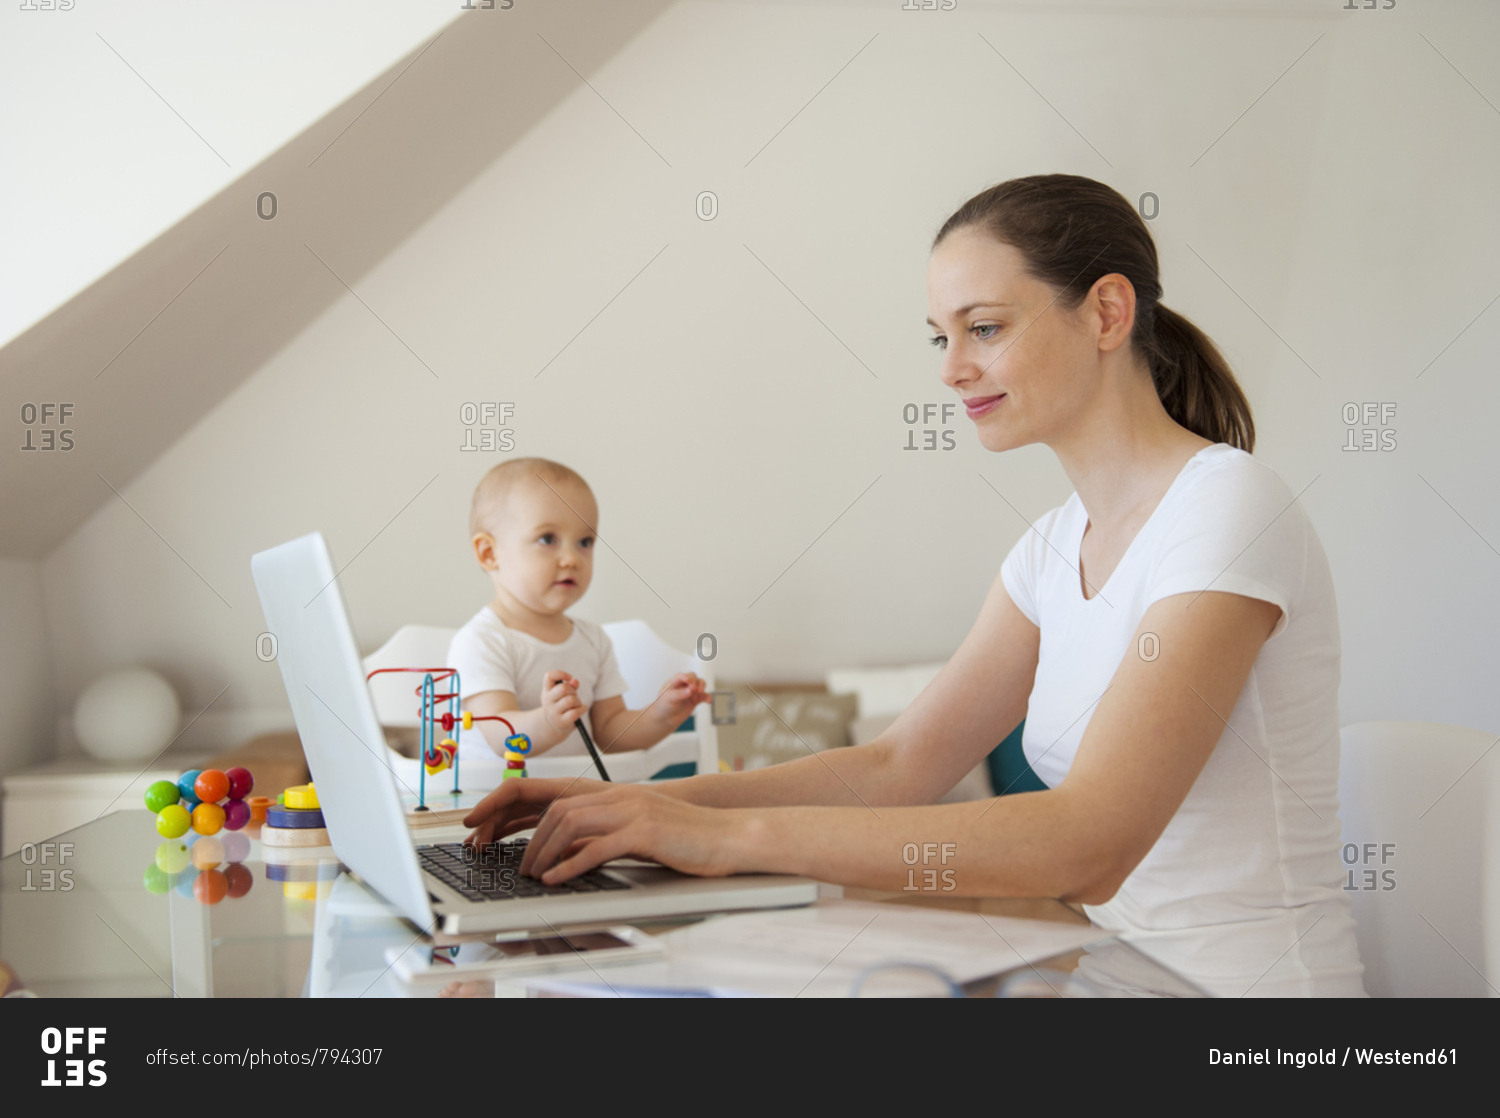 Smiling mother using laptop and little daughter playing at table at home